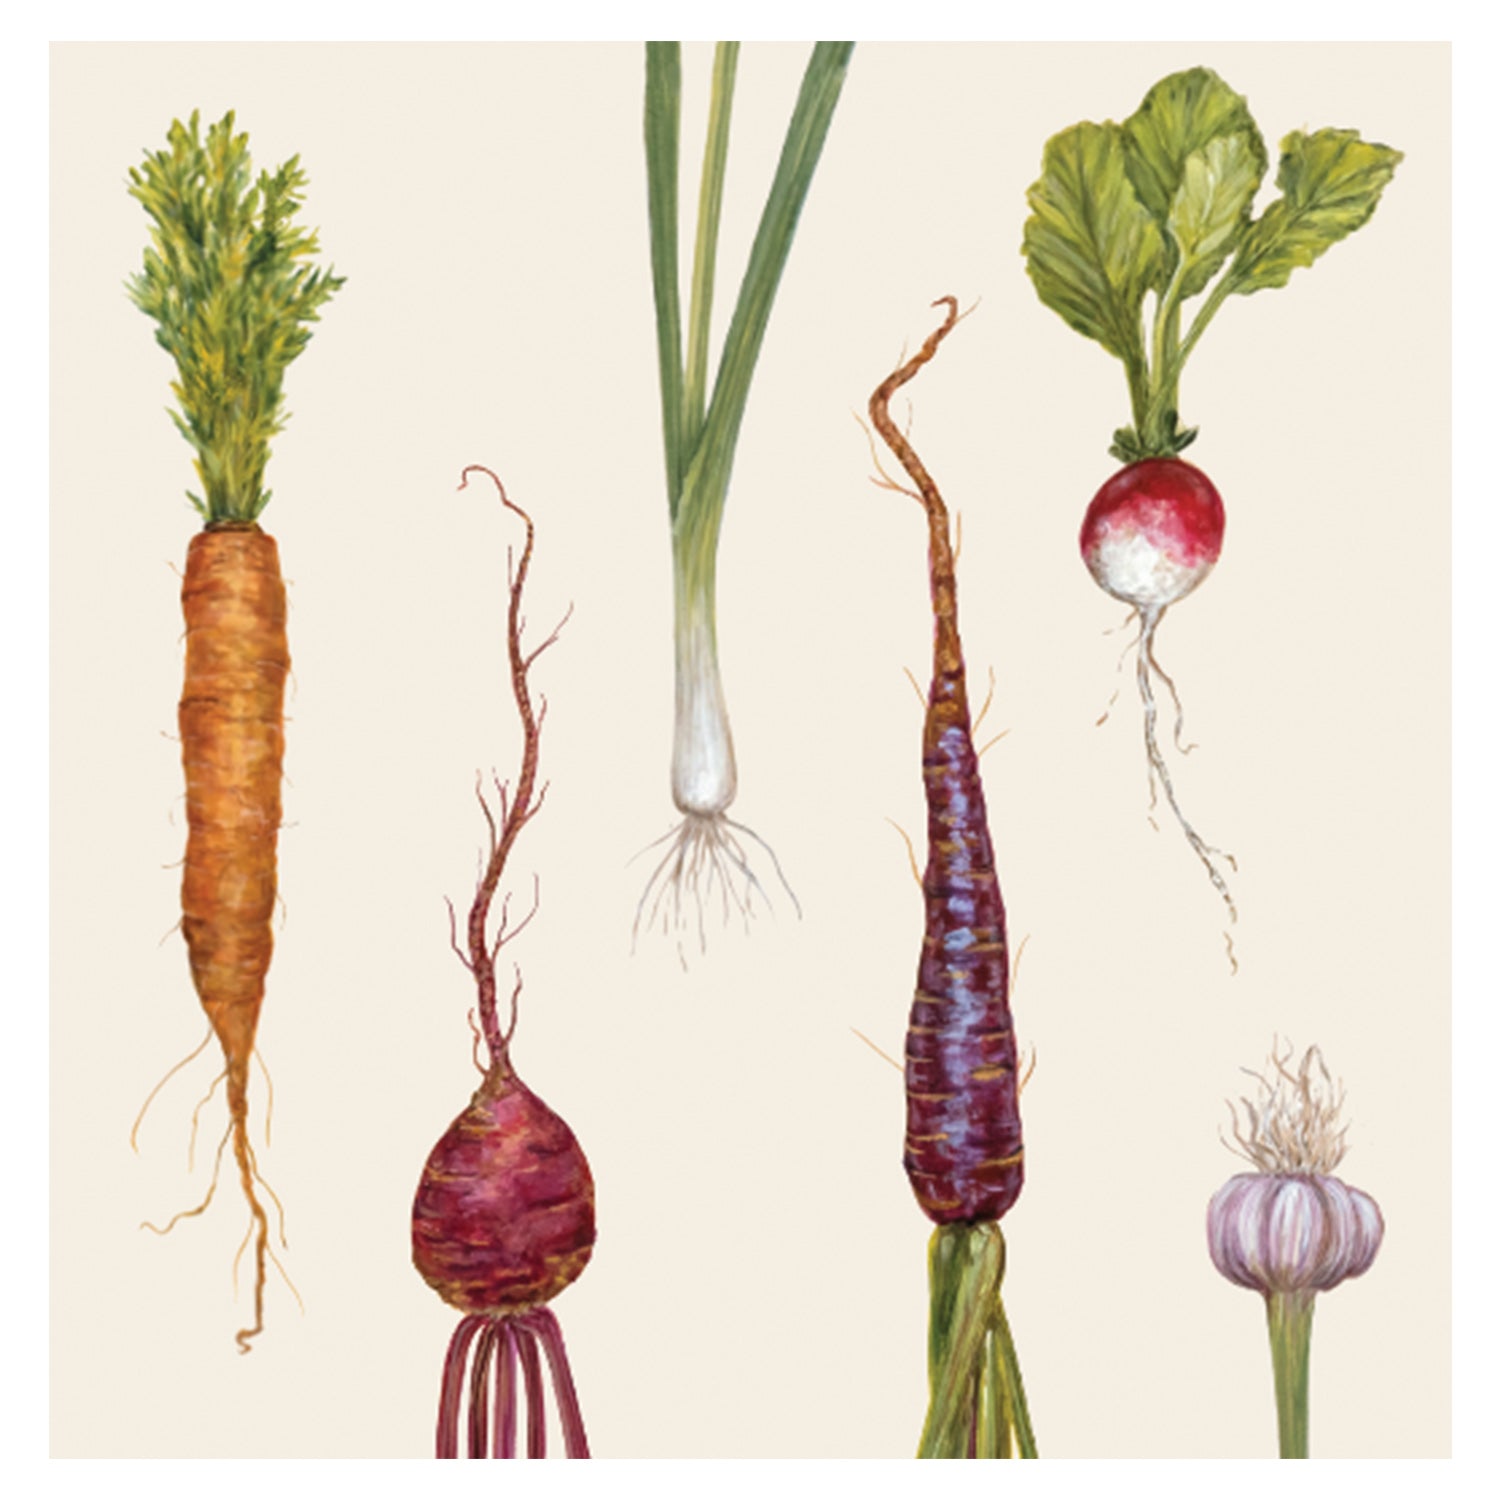 This description showcases a variety of harvest vegetables including beets, carrots, radishes, onions, and garlic.